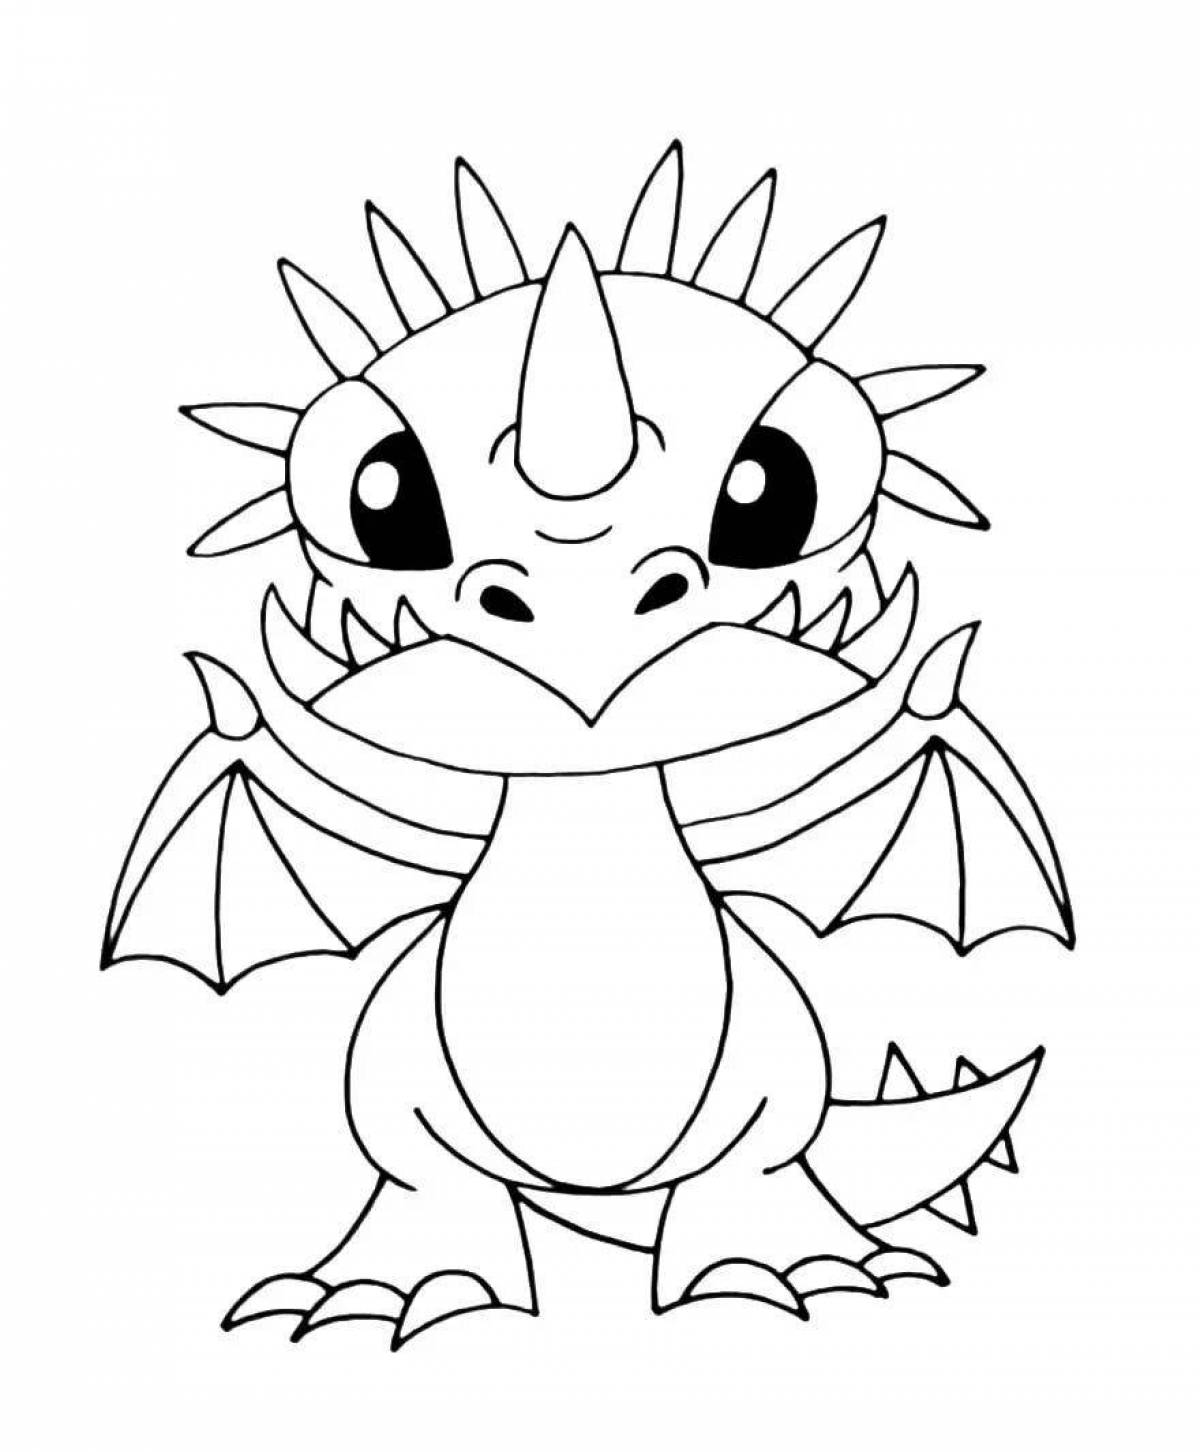 Cute and fierce dragon coloring book